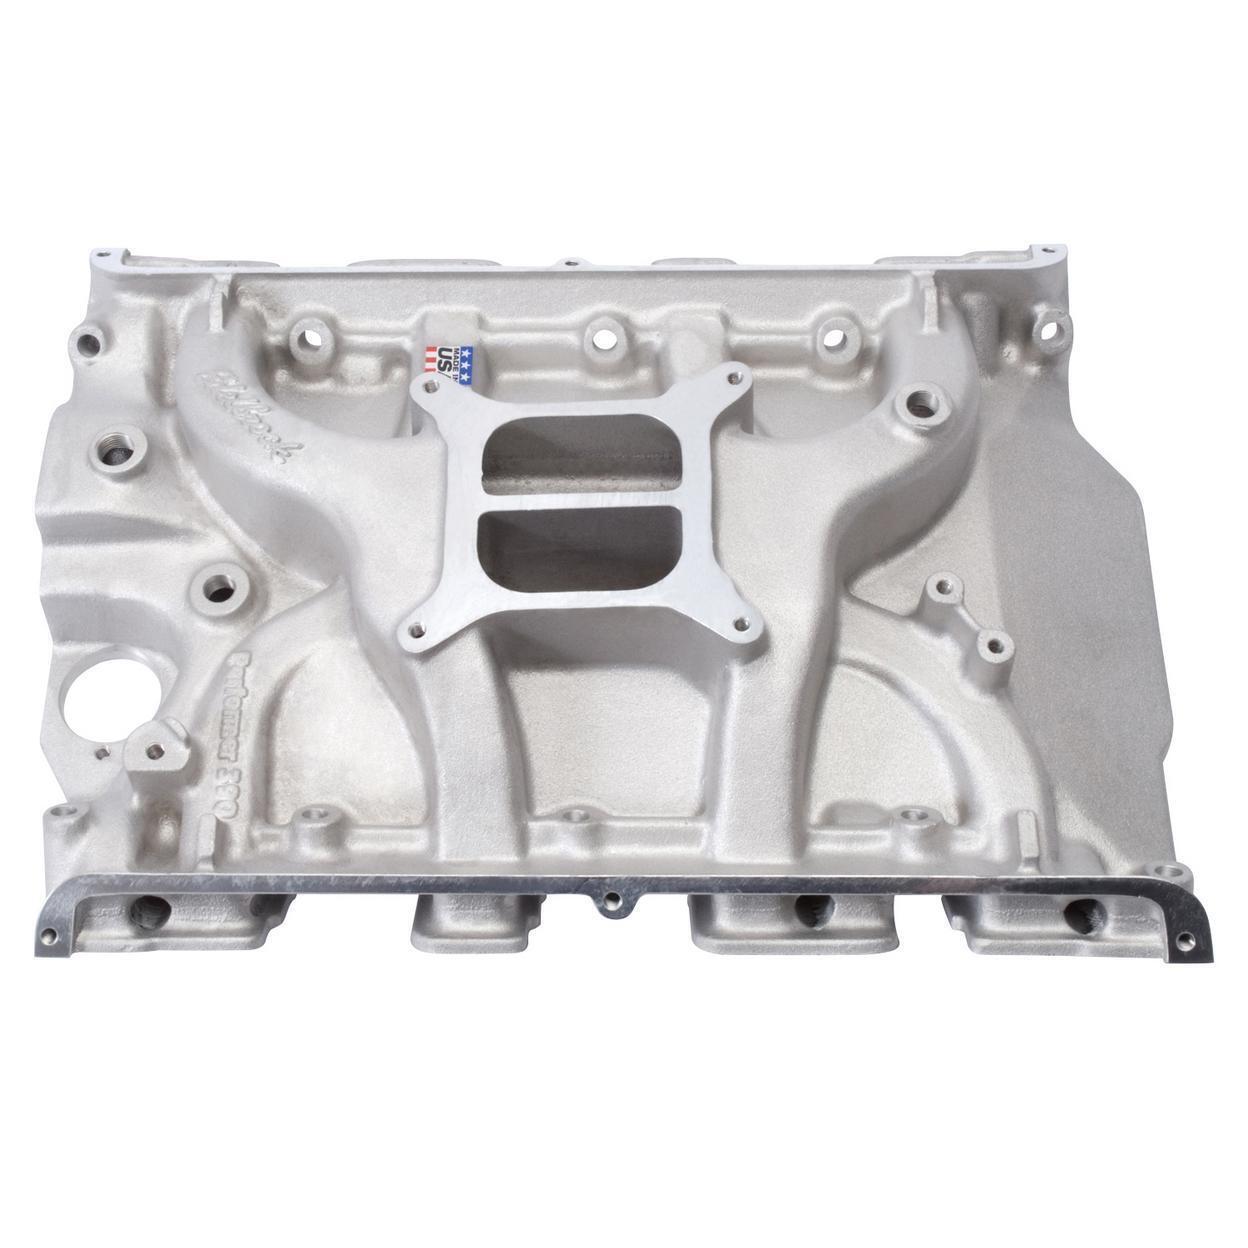 Engine Intake Manifold for 1968 Ford Mustang Shelby GT-500 7.0L V8 GAS OHV